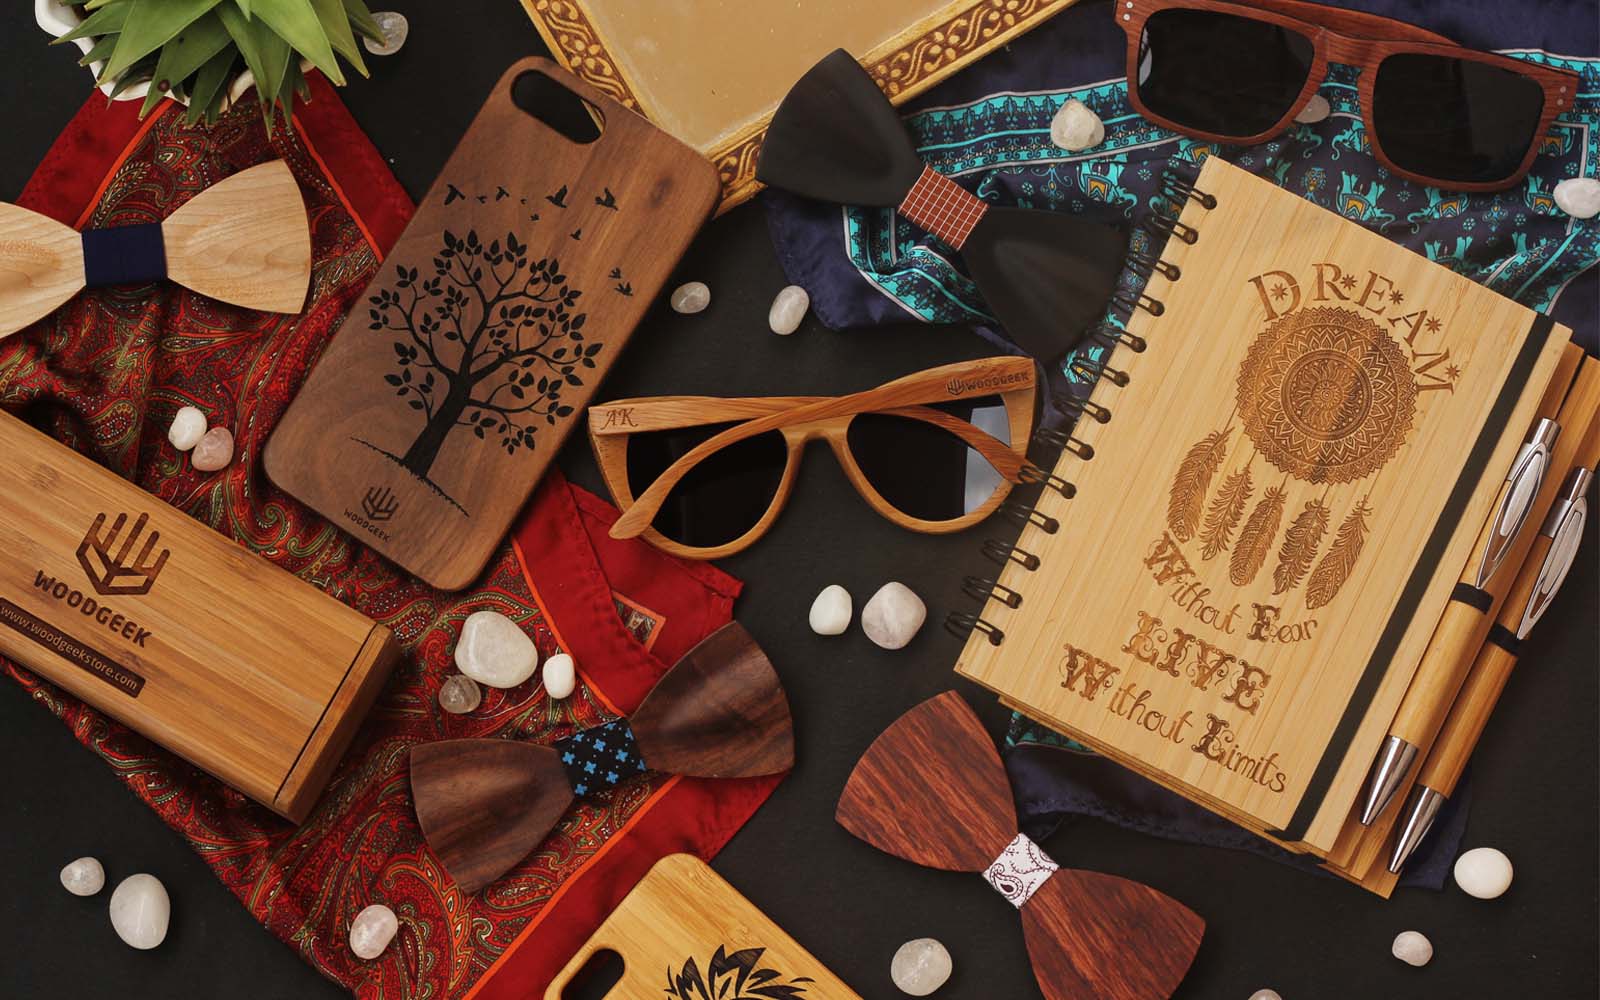 Unique Wooden Gifts - Online Wooden Products - Wooden Notebook - Wooden Writer's Diary - Wooden Bow Tie - Prescription Glasses - Wooden Sunglasses - Best Iphone Cases - Wooden Phone Case - Wooden Gifts For Him - Wooden Gifts For Her - Christmas Gifts - Woodegeek - Woodgeekstore